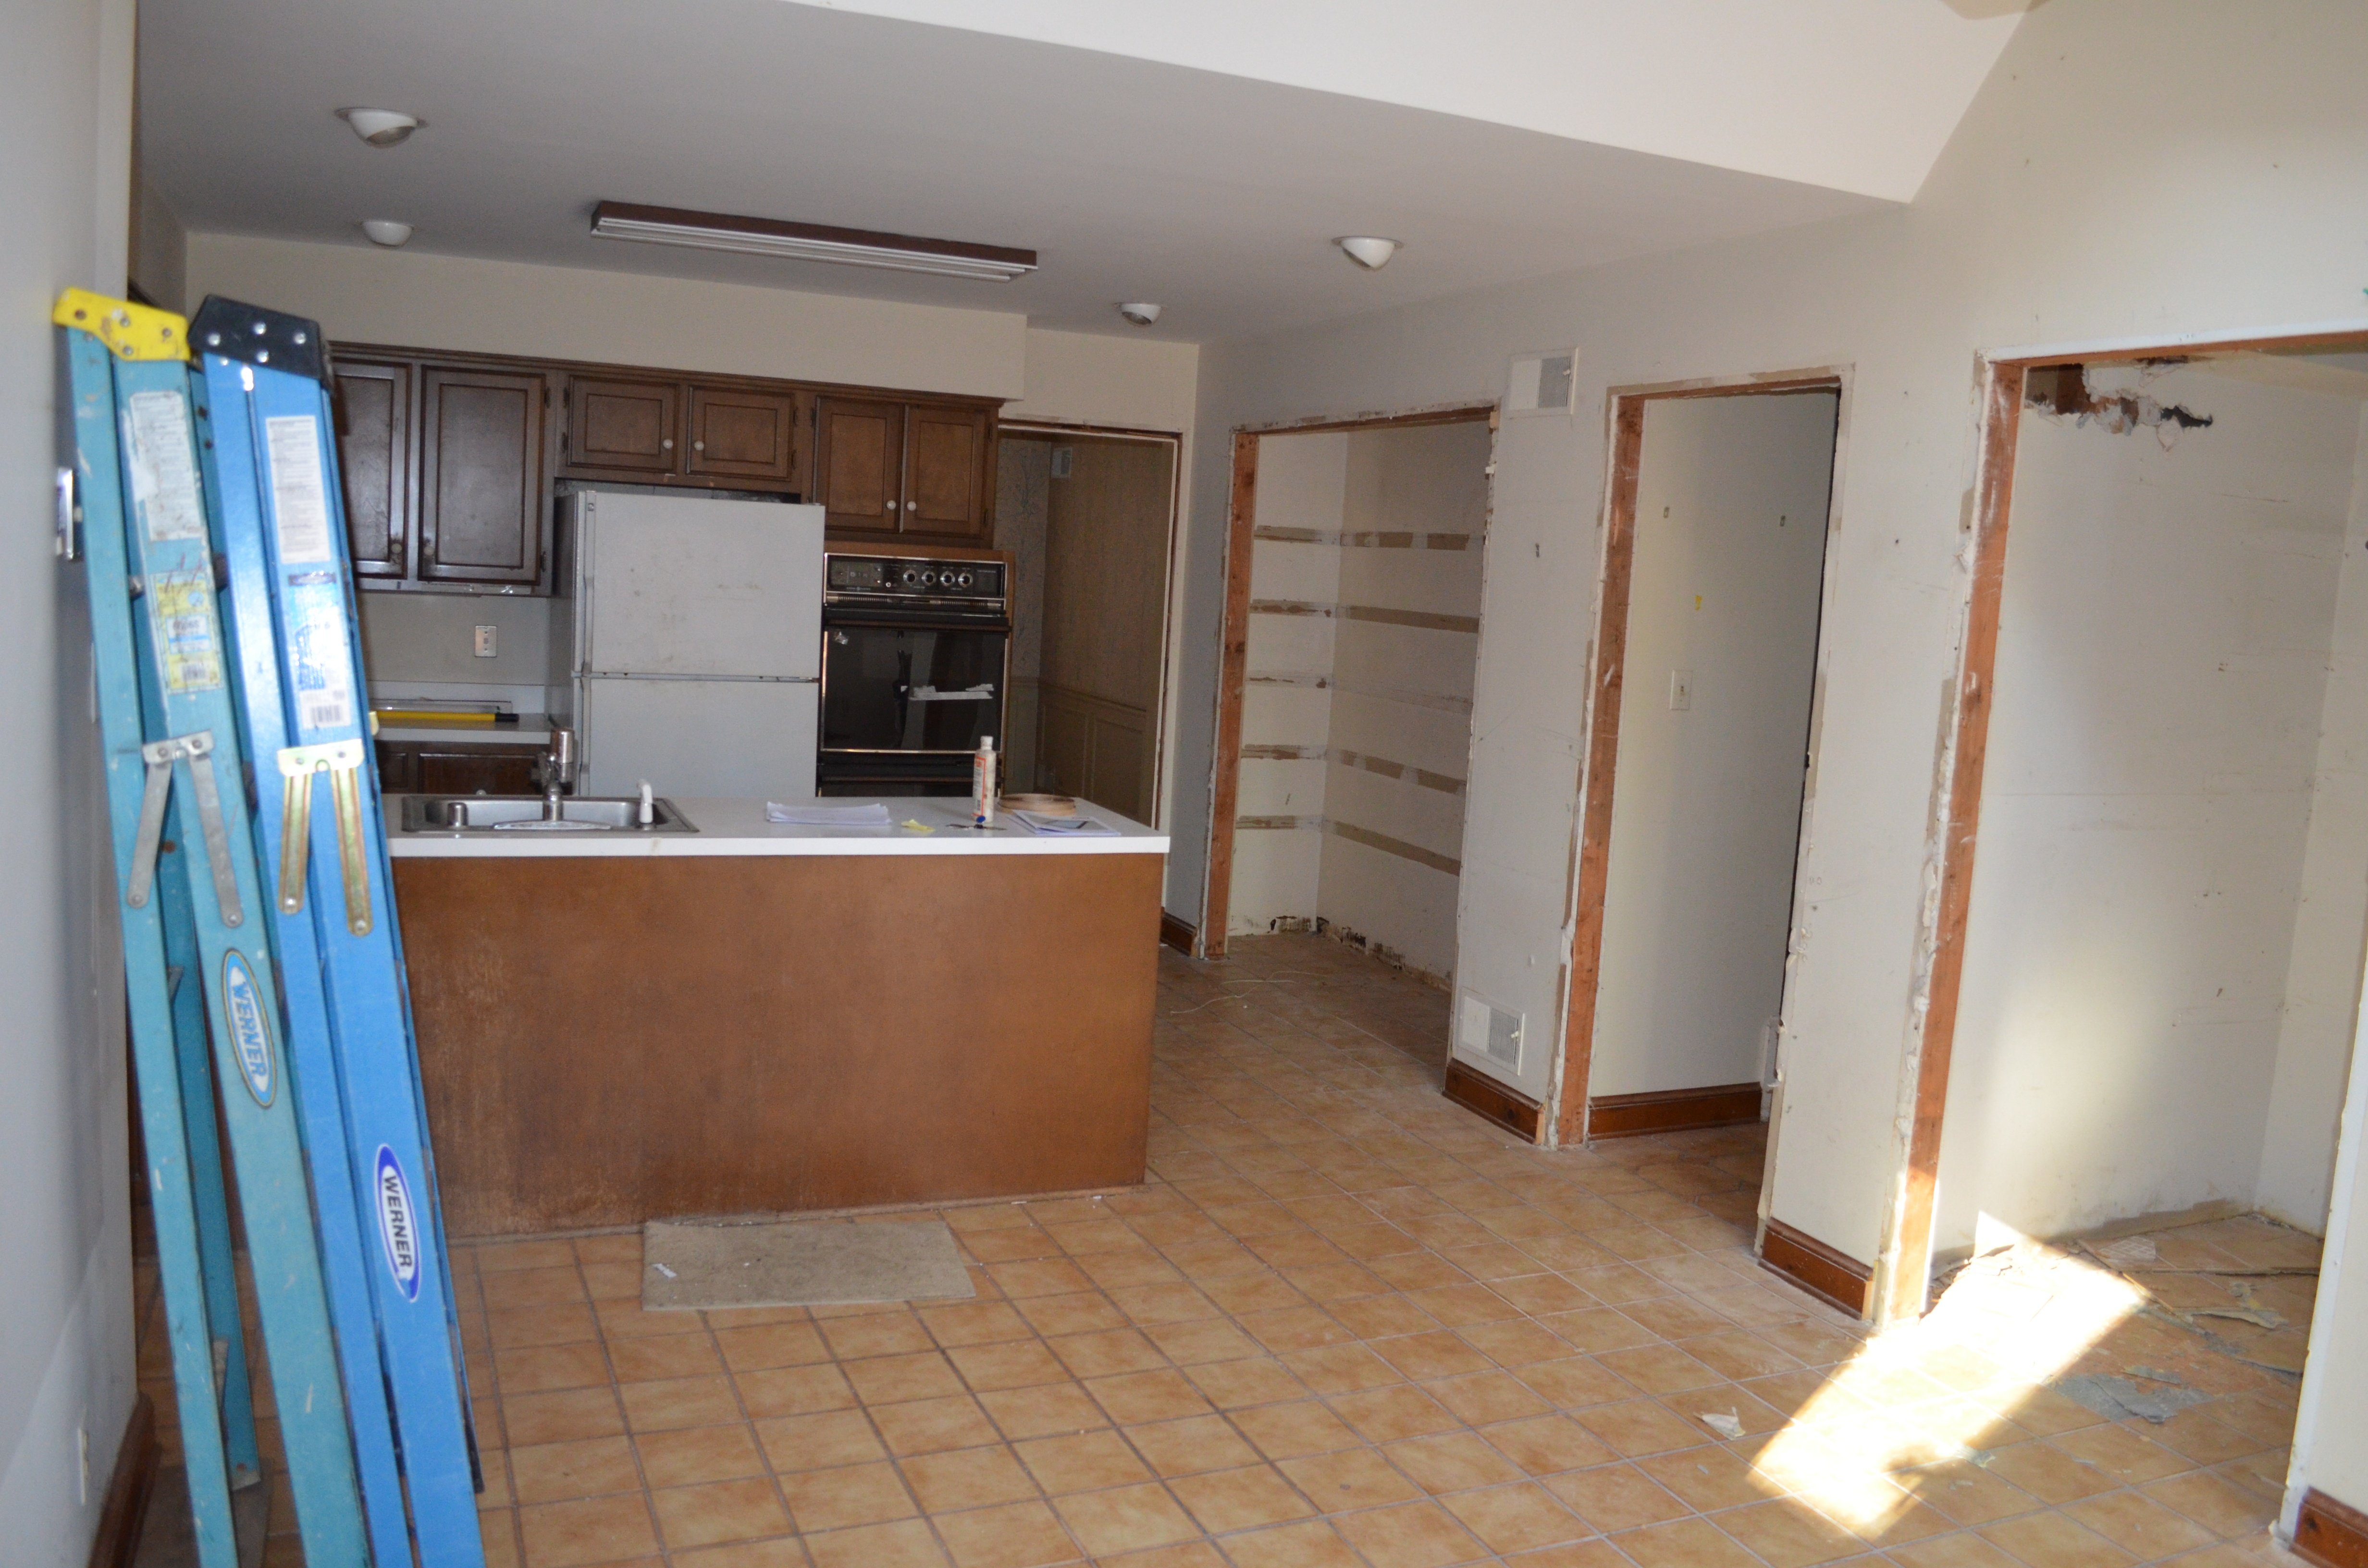 kitchen remodel before G